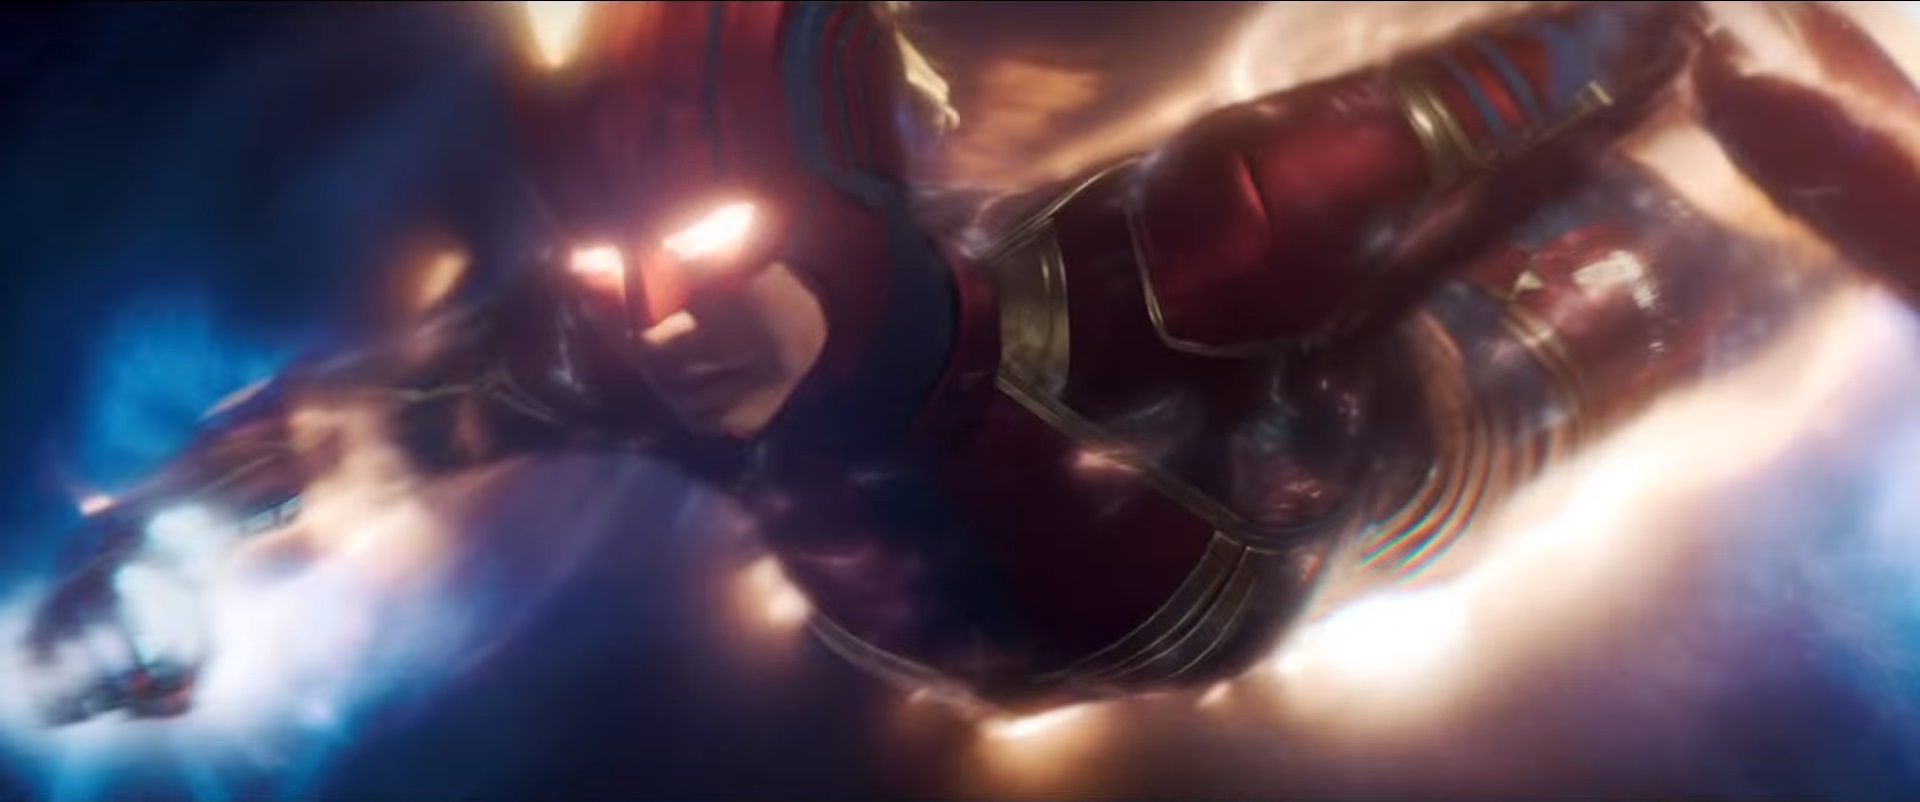 CAPTAIN MARVEL: Check Out Over 55 Hi-Res Screengrabs From The Epic New